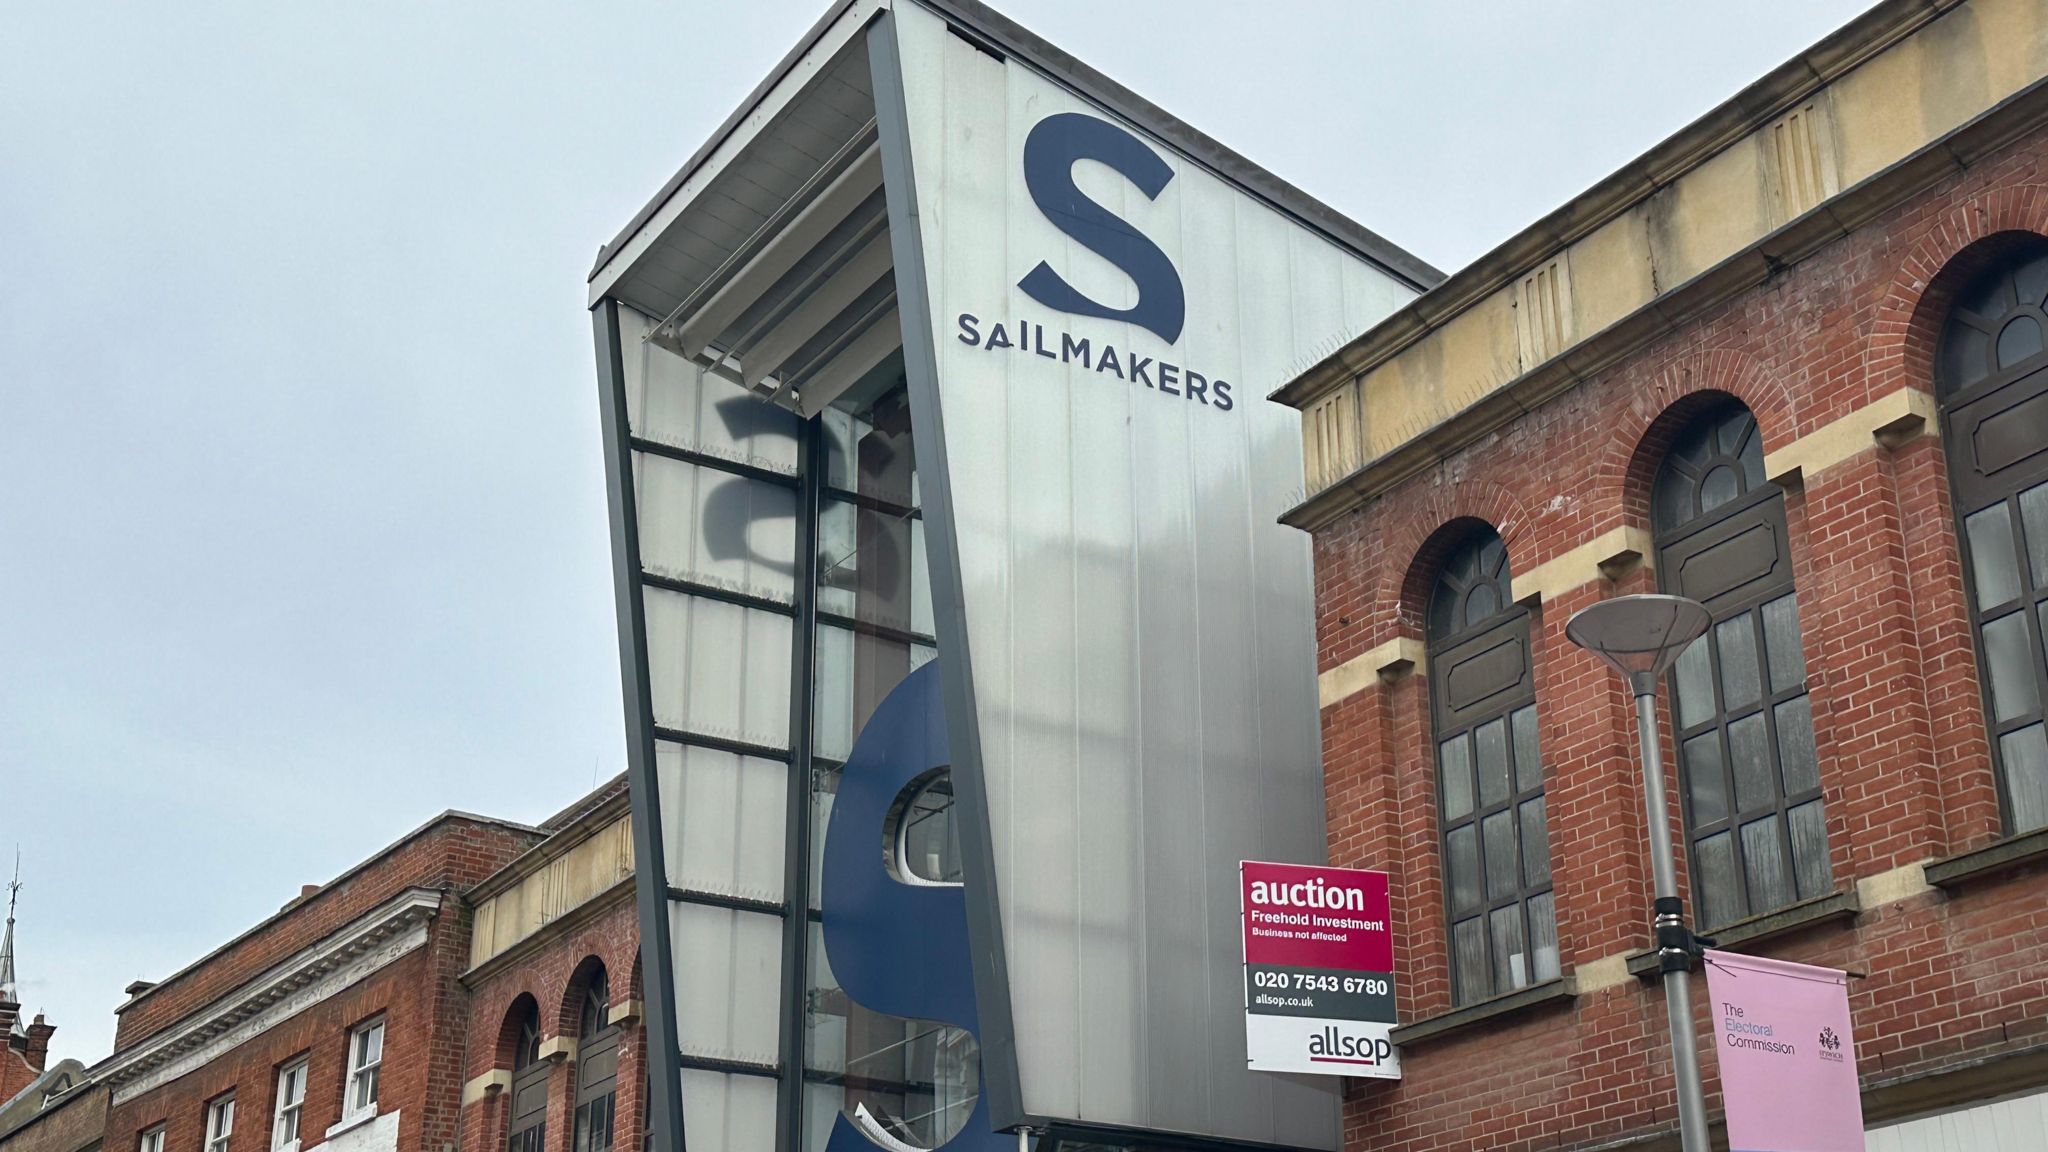 Sailmakers Shopping Centre in Ipswich